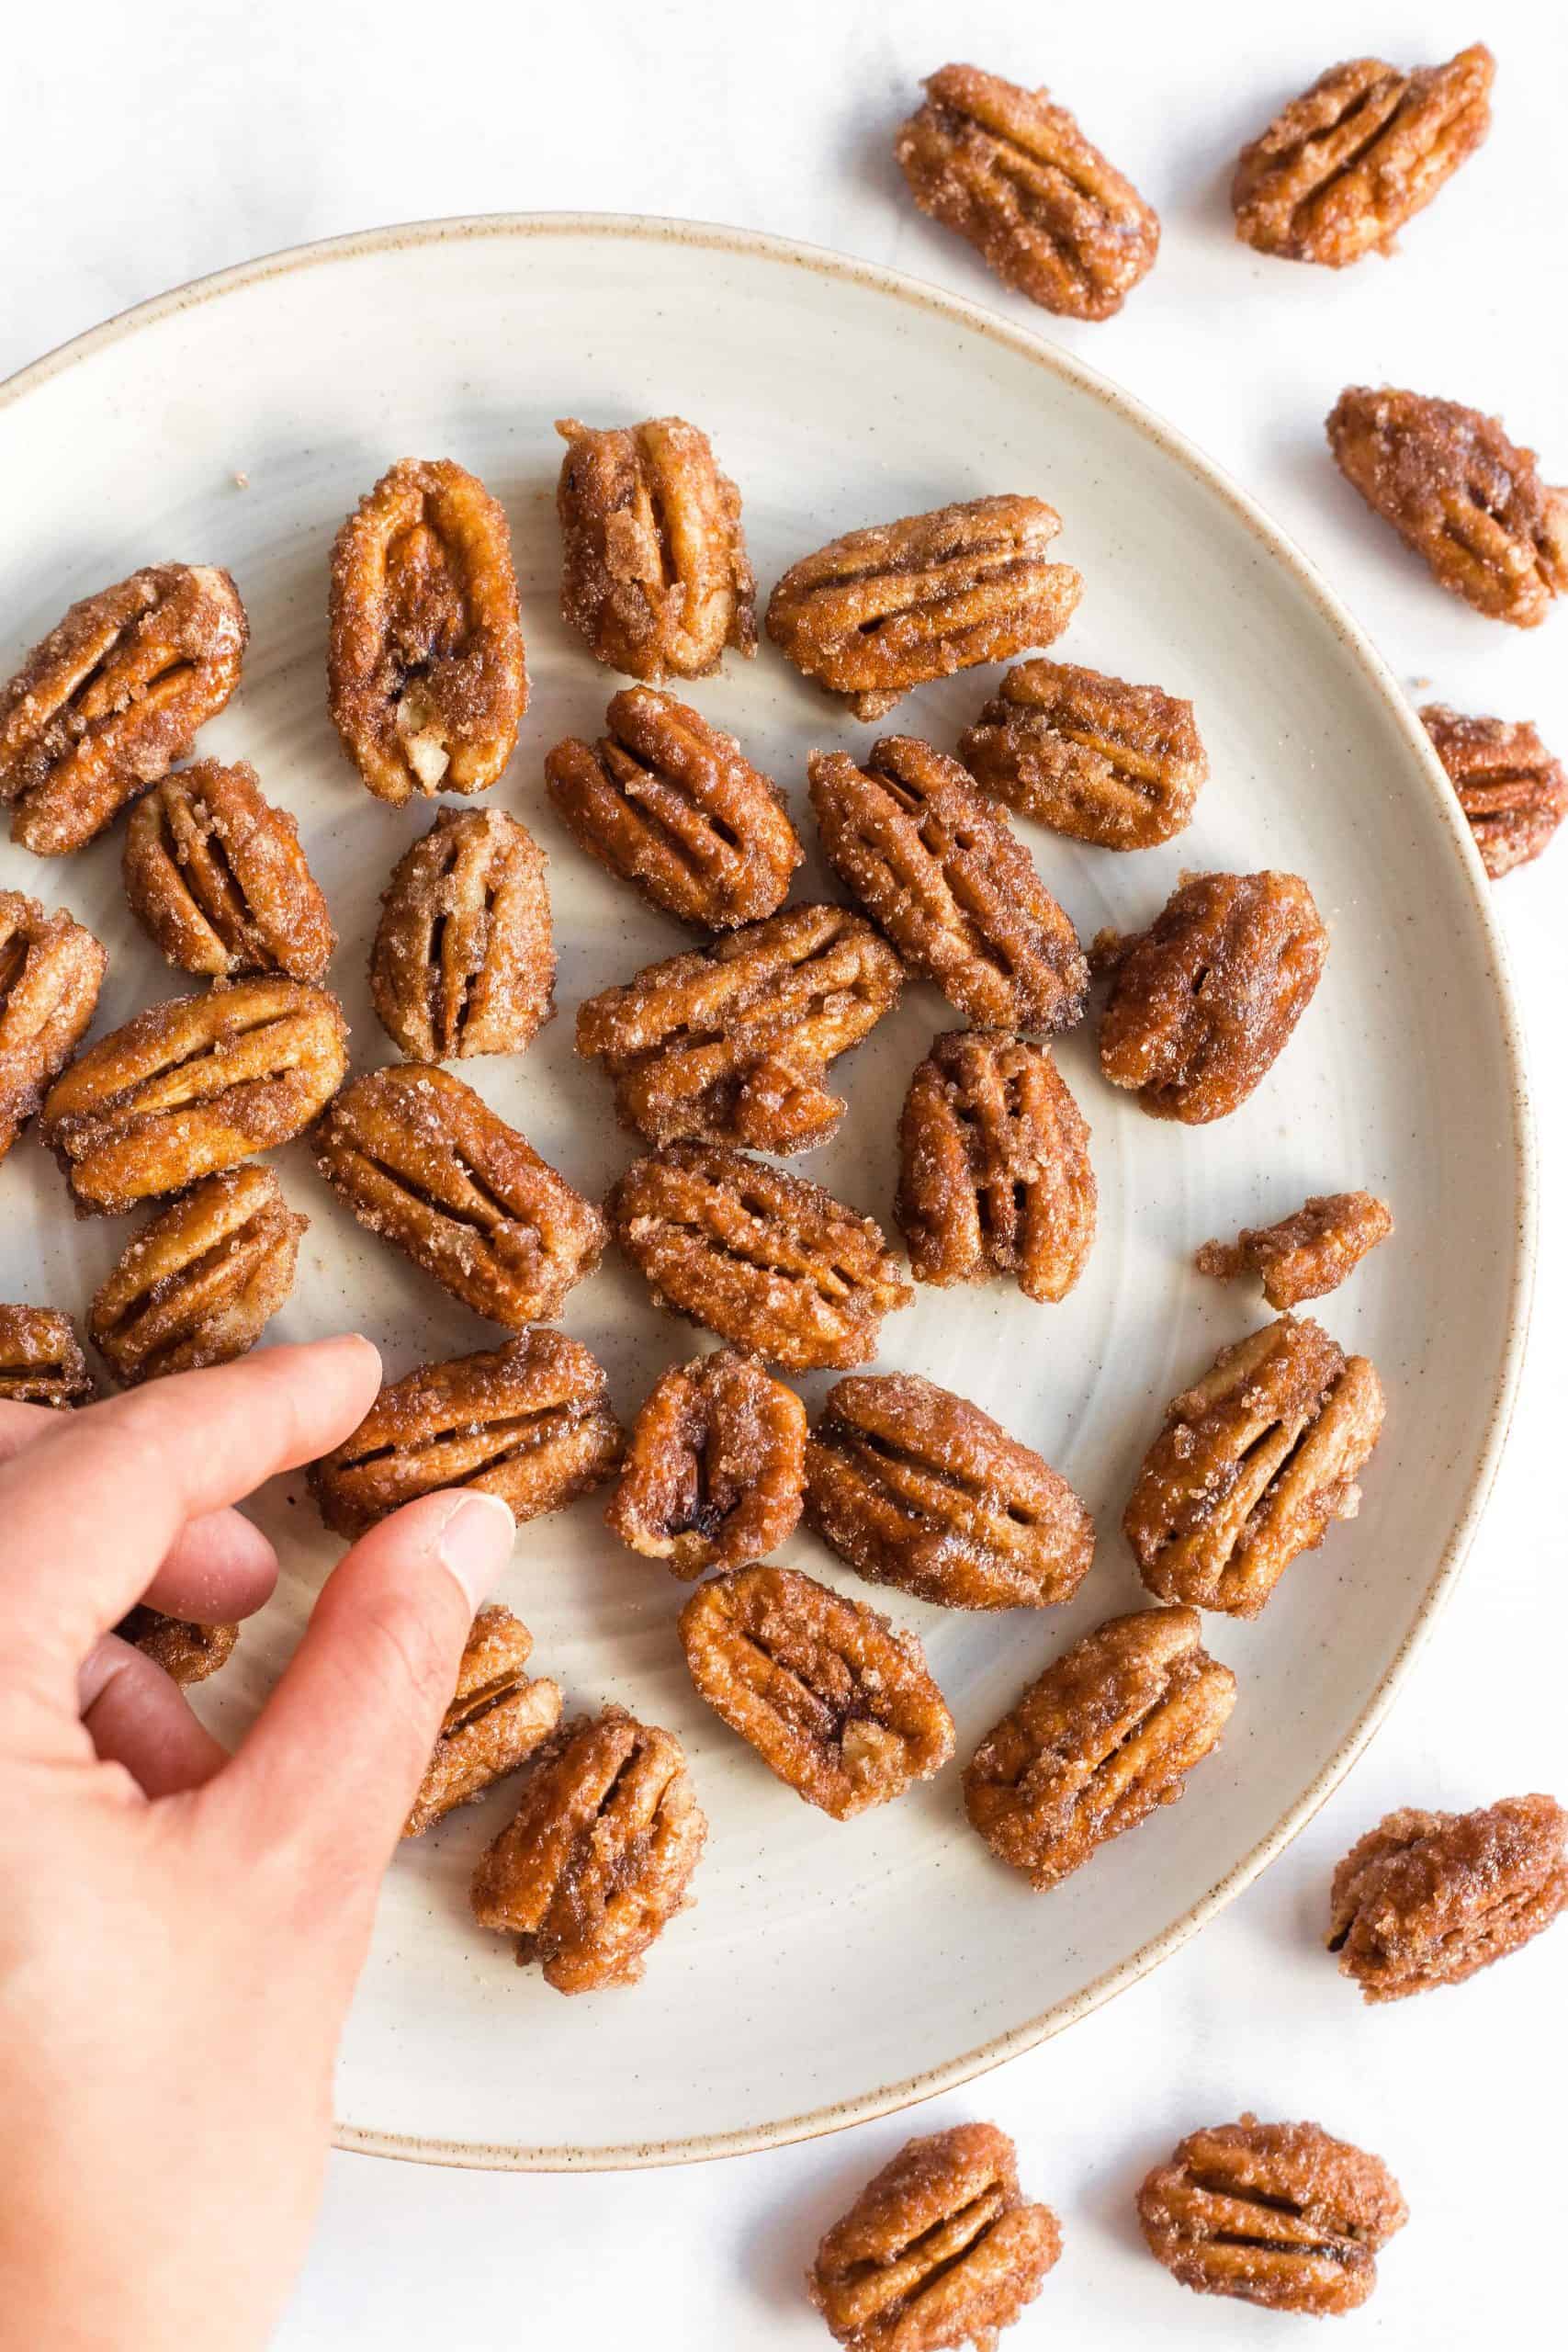 Picking up a pecan from a plate full of candied pecans.